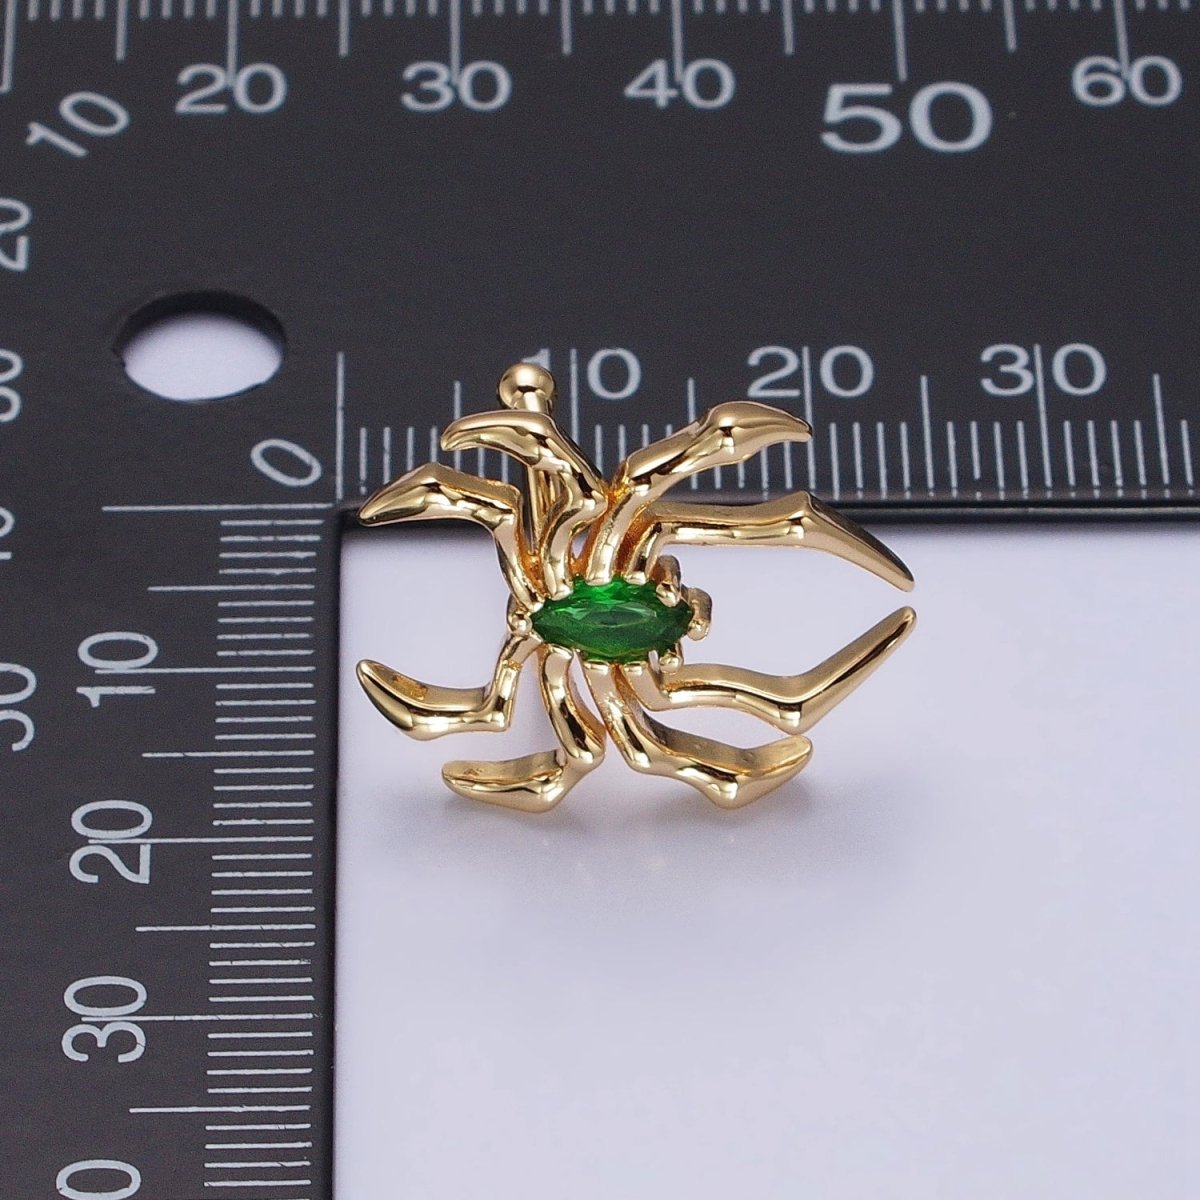 Gold Spider Ear Cuff Earring with Emerald Green Cz Stone for Halloween AB645 AB646 - DLUXCA